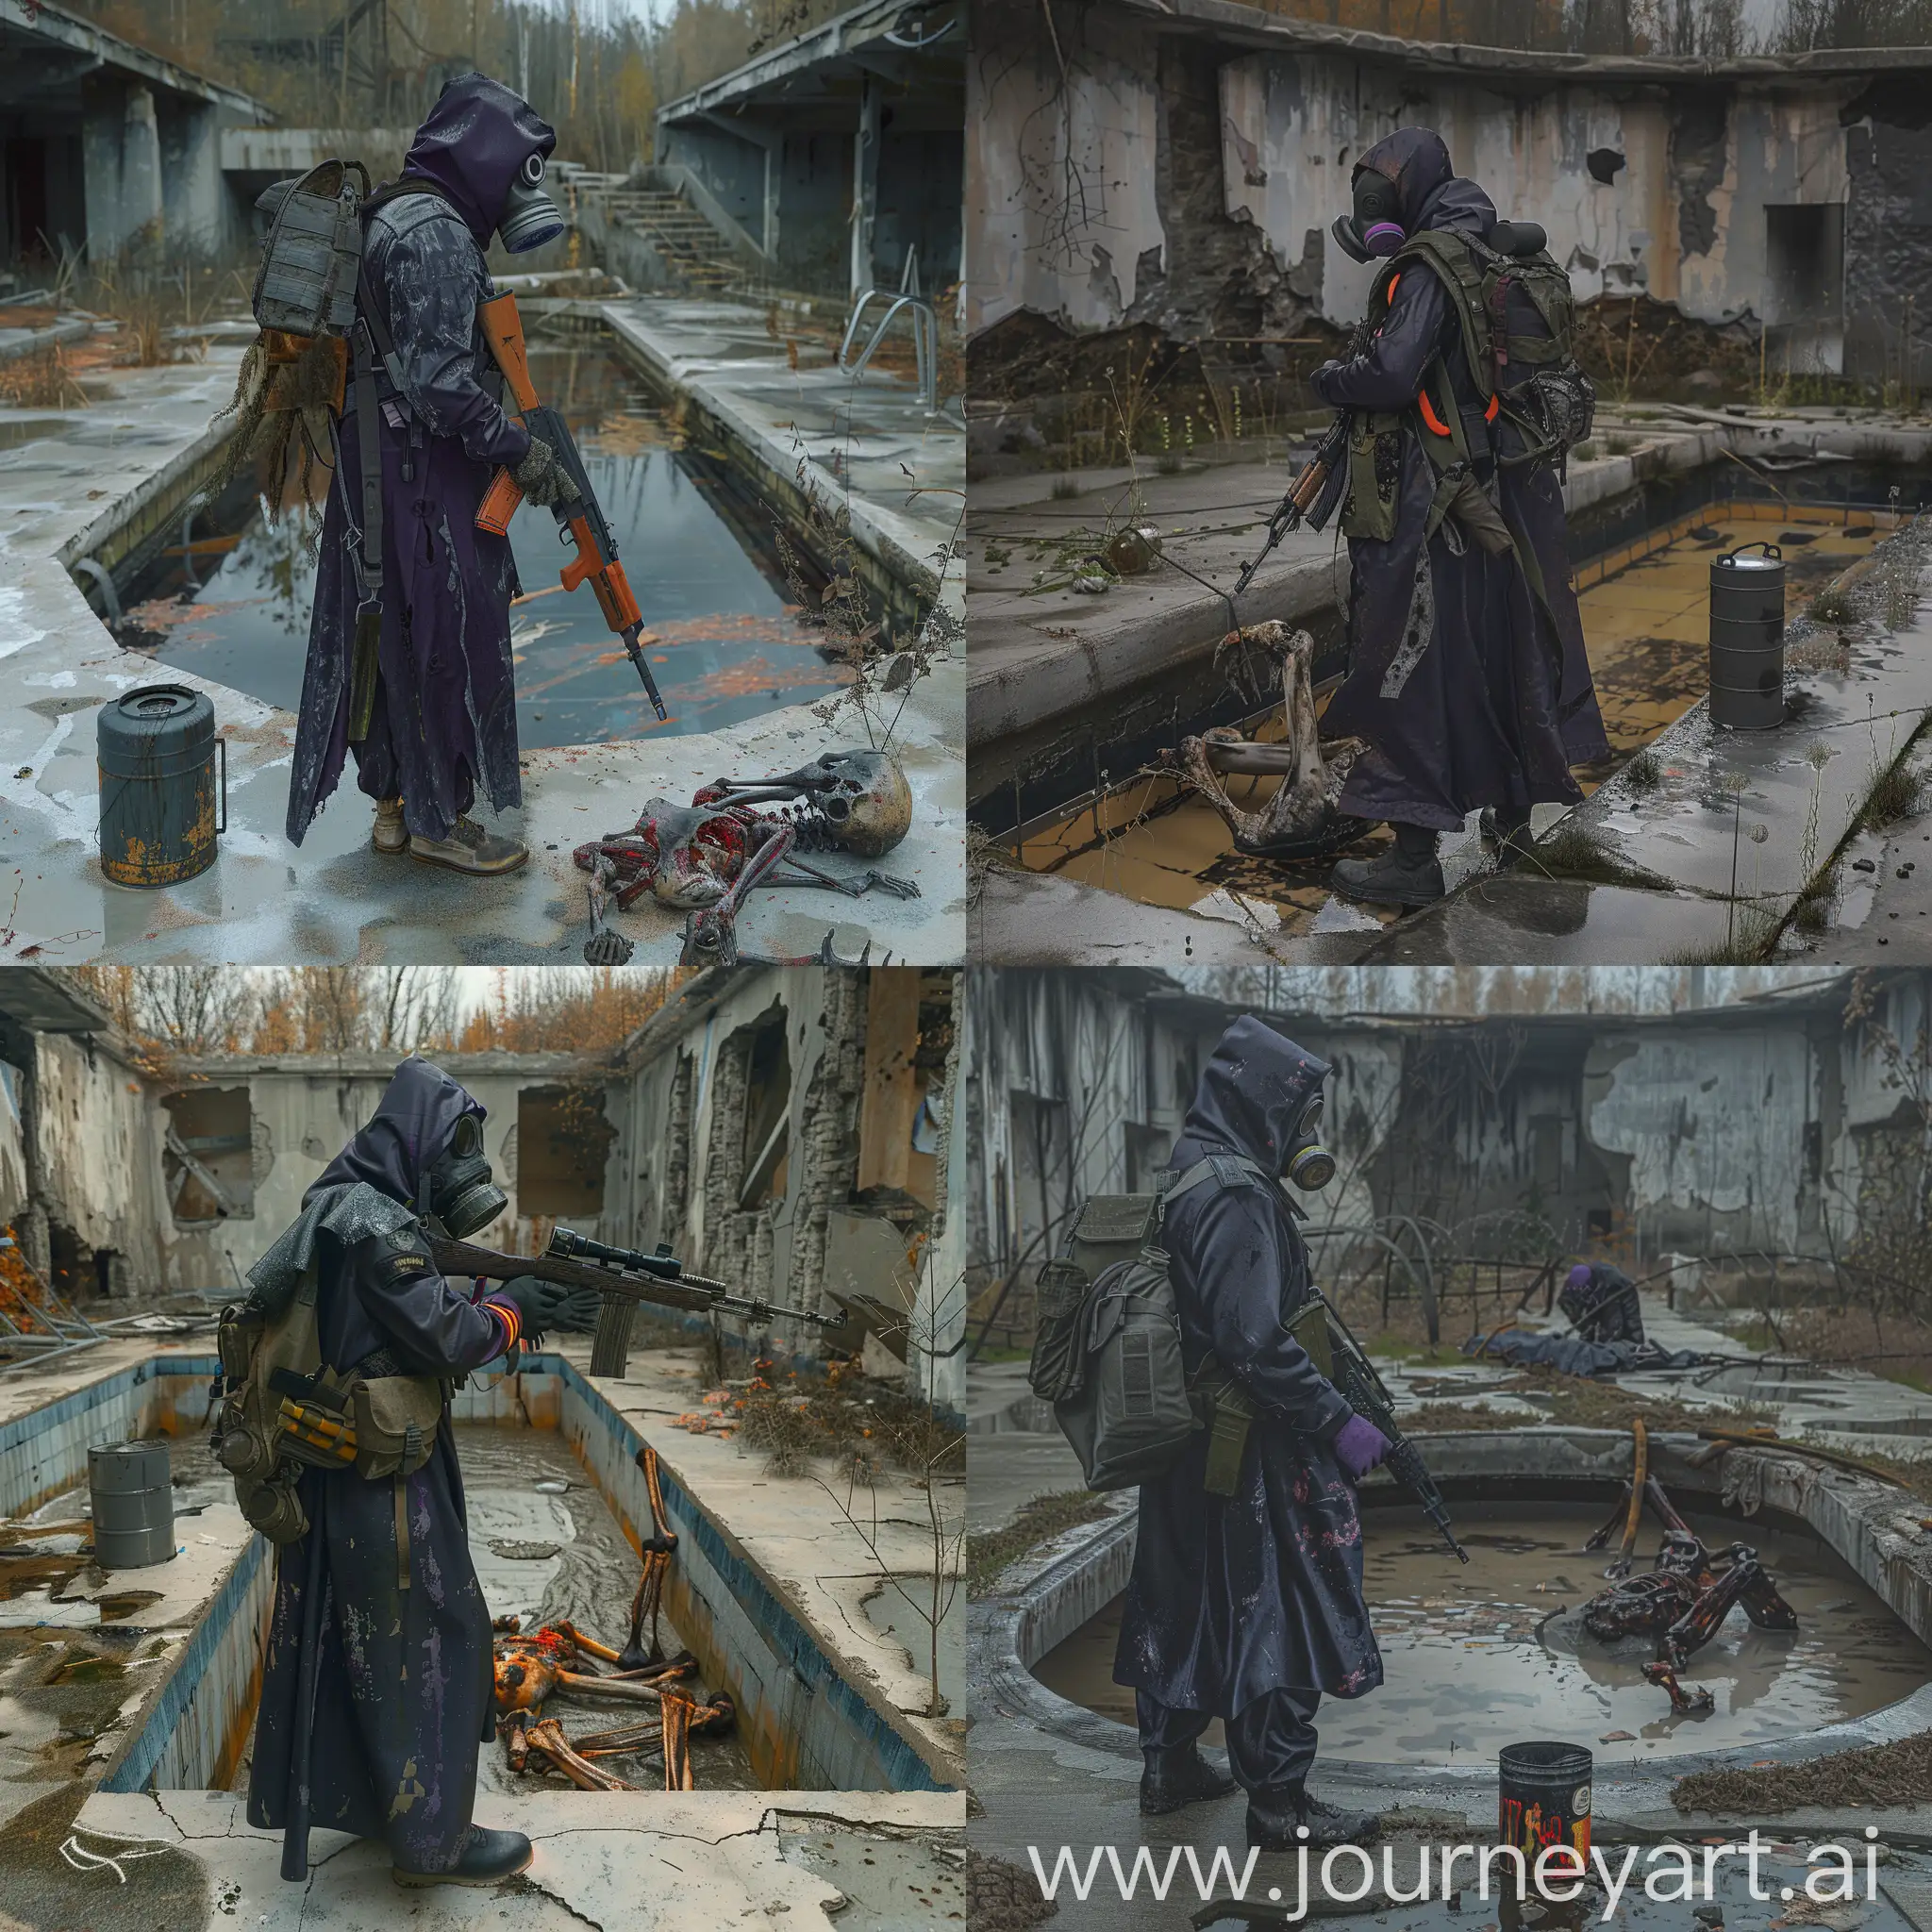 A mercenary in a dark blue recrut uniform, dirty gray raincoat, gasmask on his face, a Dragunov SVD rifle in his hands, a military backpack on his back, a stalker stands inside a Soviet abandoned pool, the pool is dry and there is no water, but 2 burnt and charred bodies are visible to the bones, there is a canister of gasoline nearby, the scene - abandoned Pripyat in Chernobyl, the weather - a gloomy autumn.